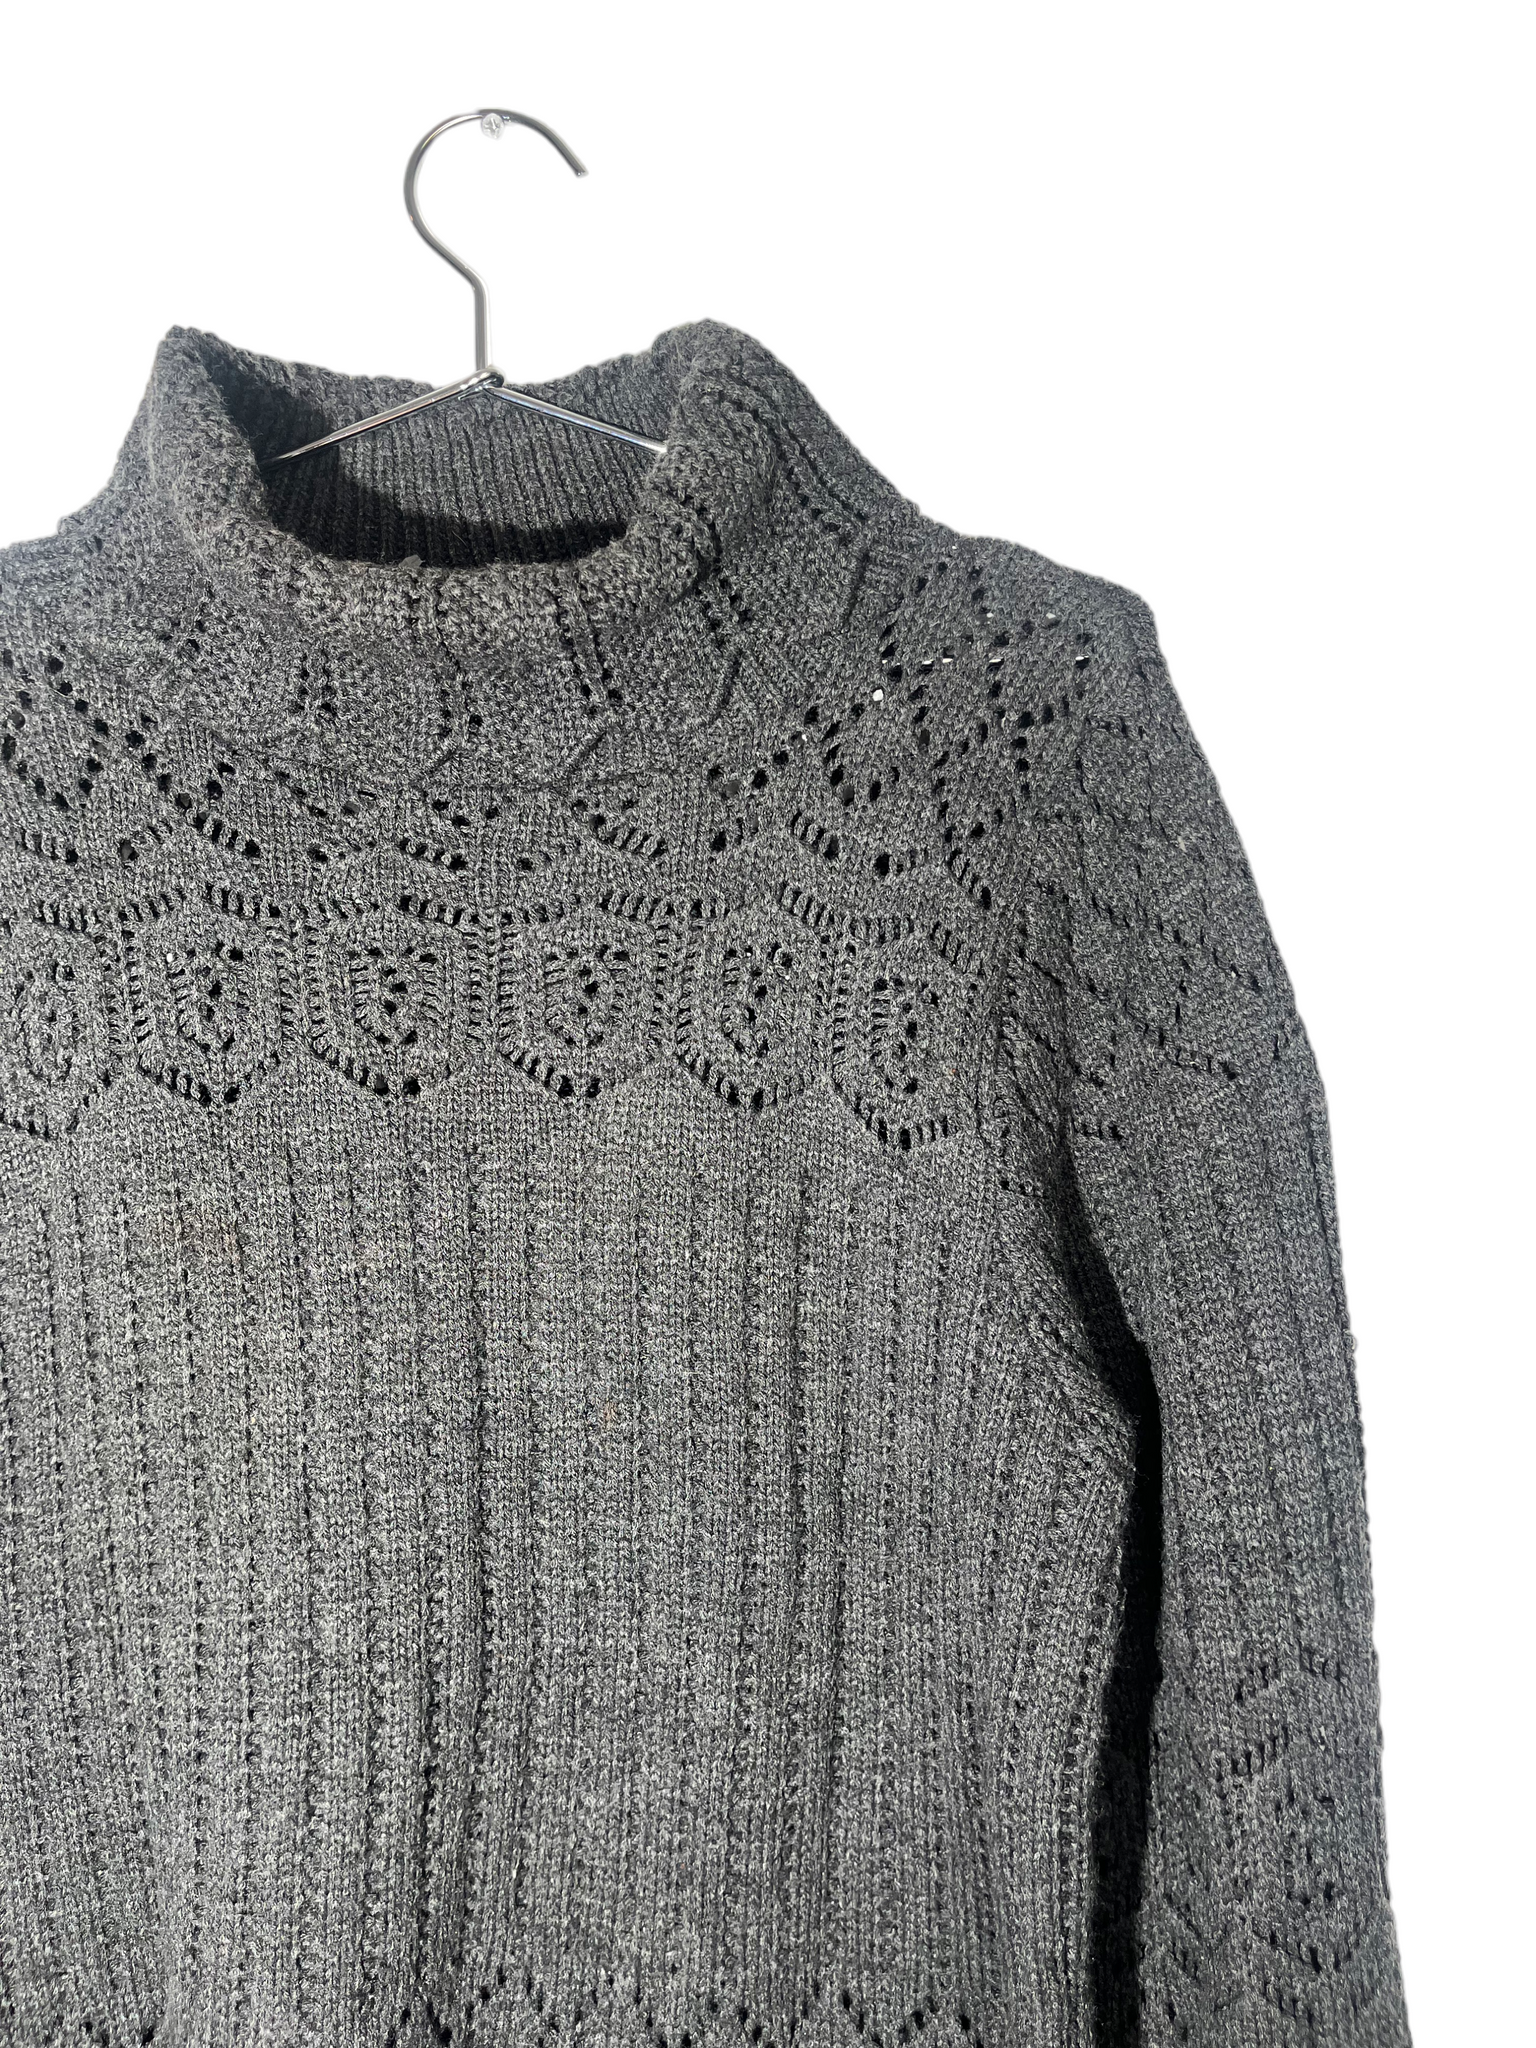 Grey Knitted Turtle Neck Sweater